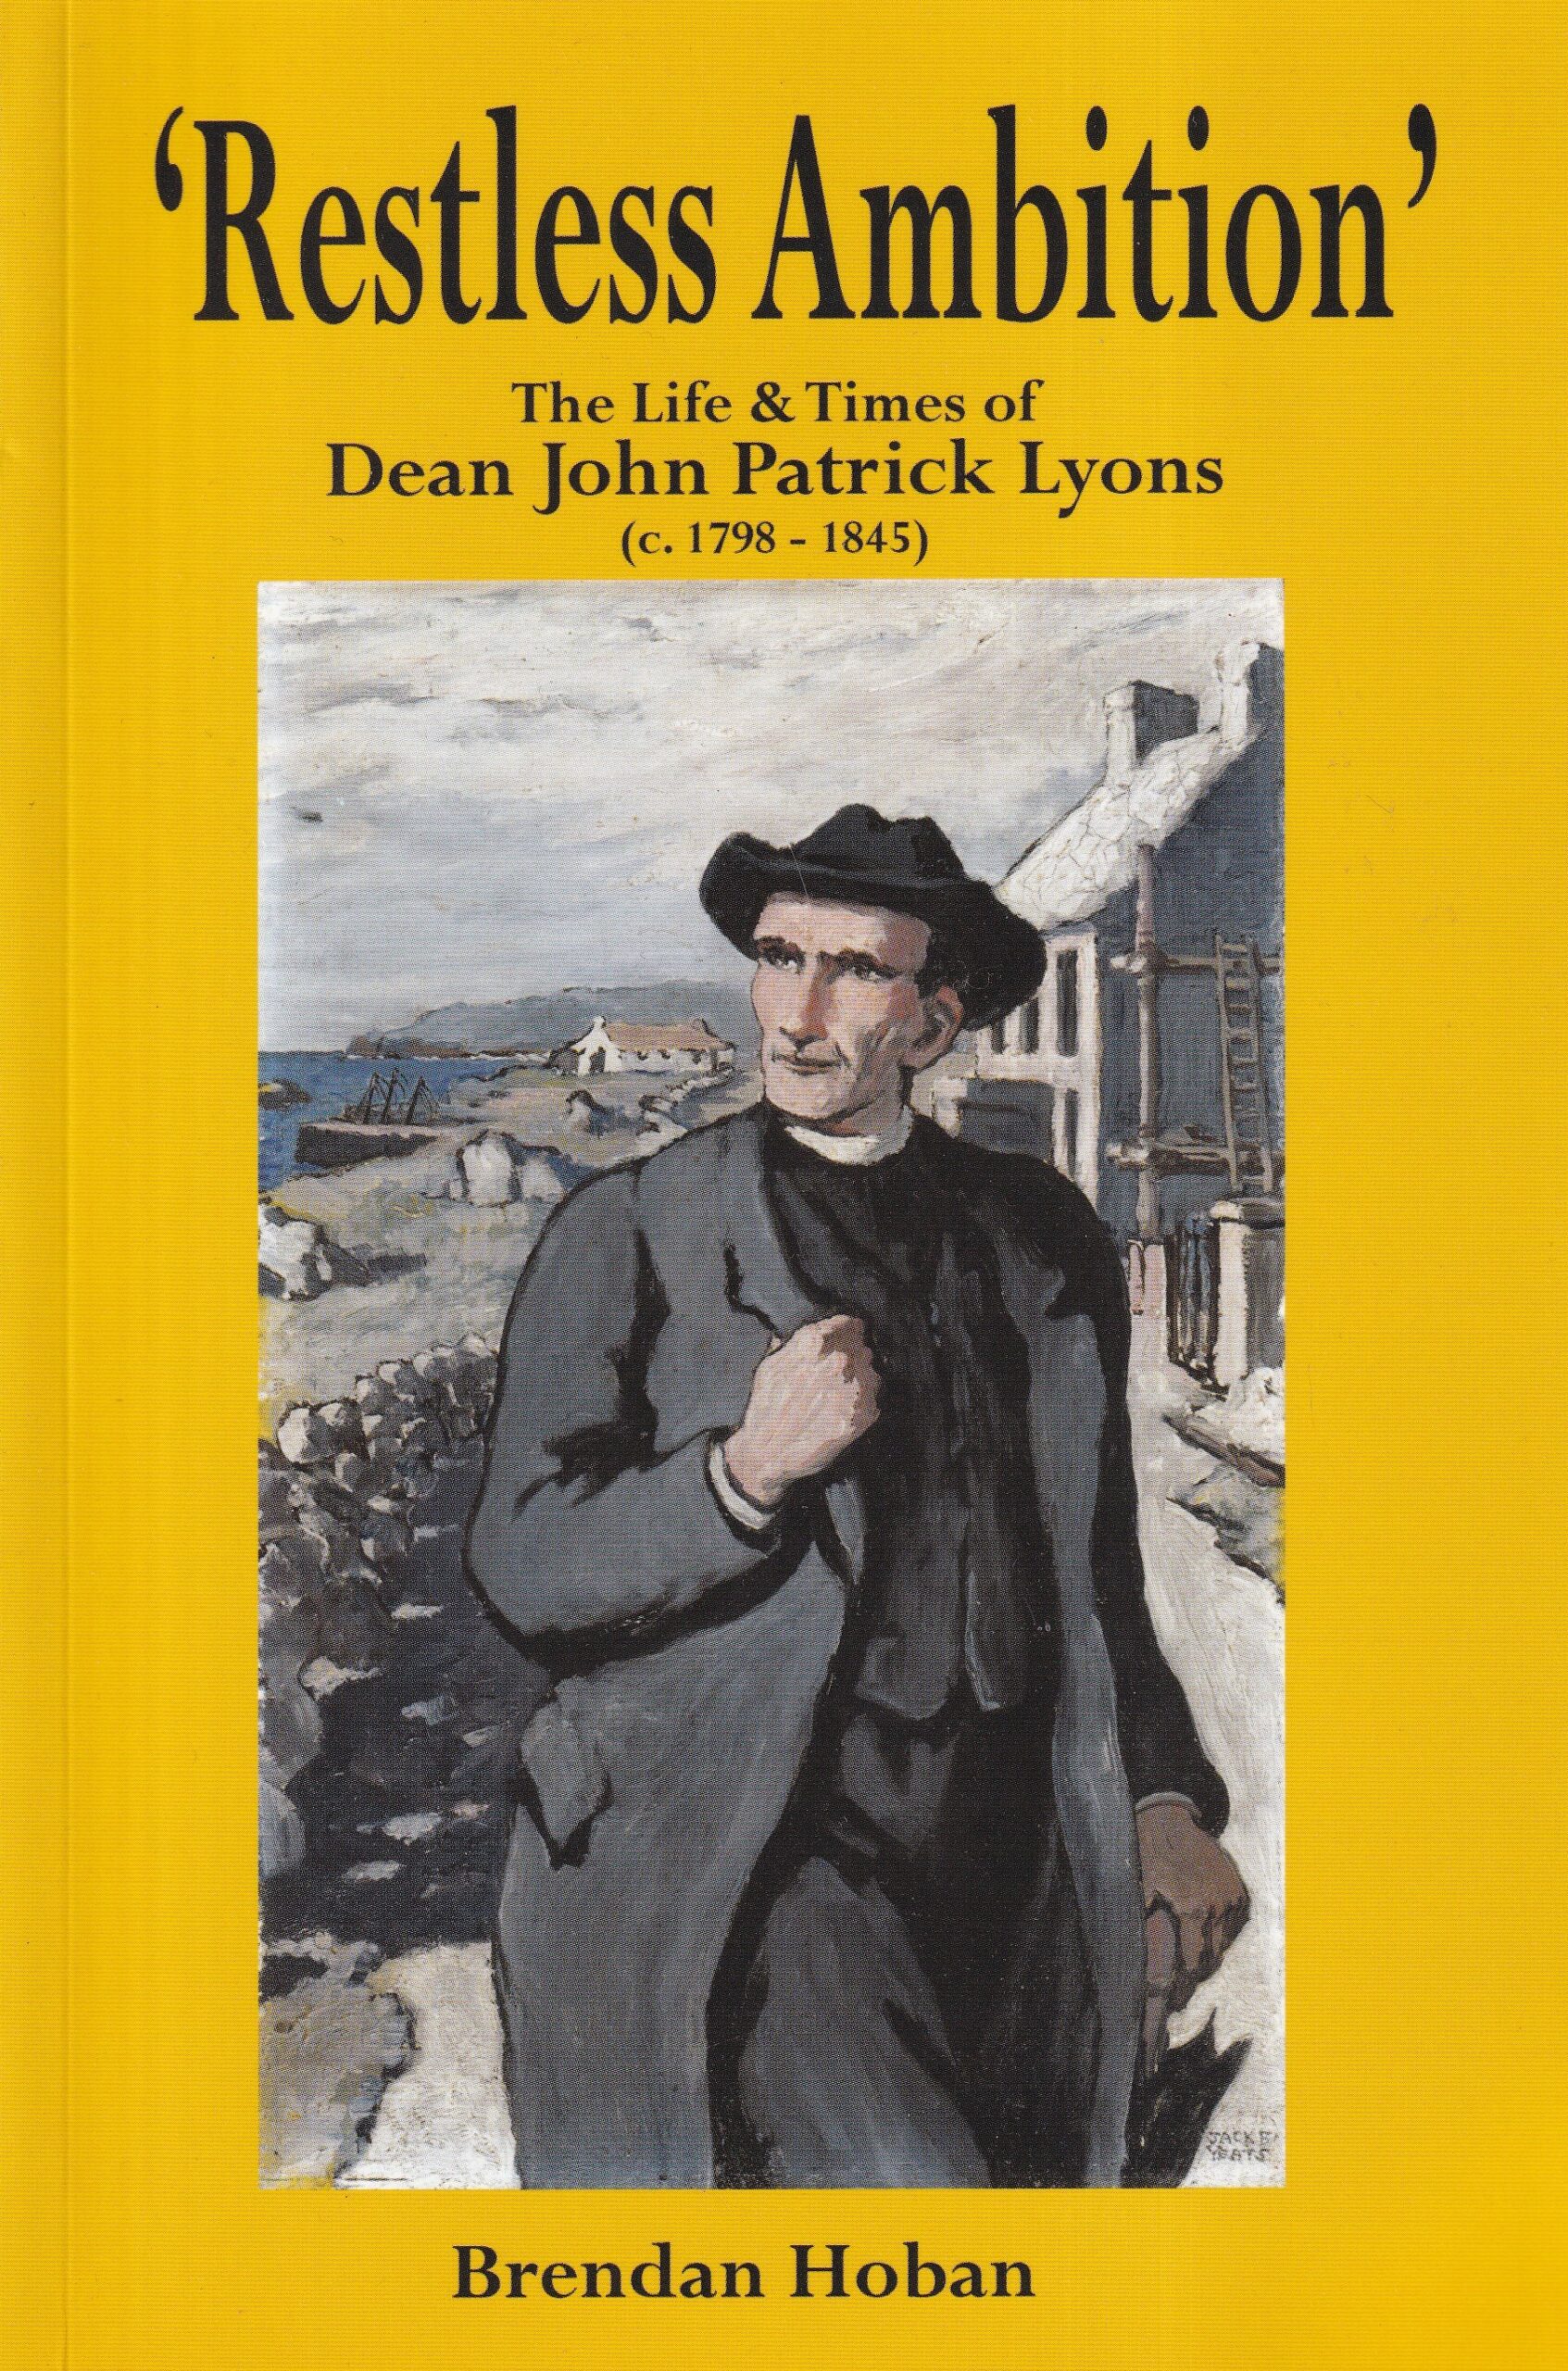 Restless Ambition: The Life and Times of Dean John Patrick Lyons (c.1798-1845)- Signed by Brendan Hoban